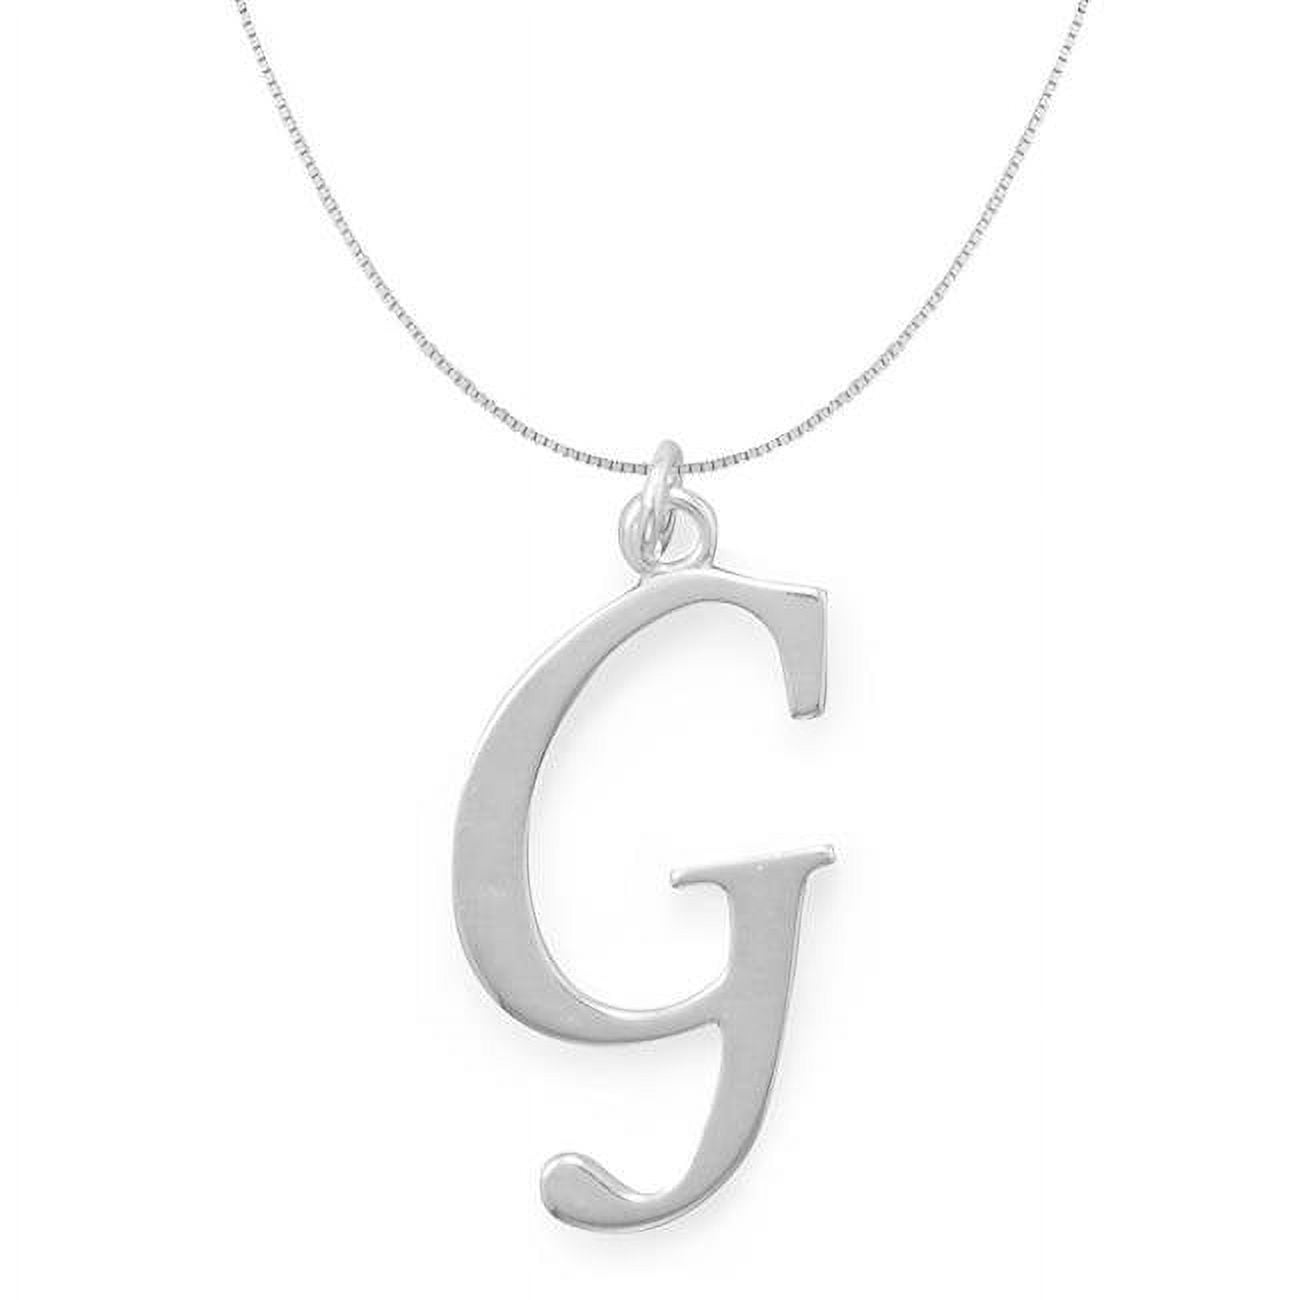 74661g-bx20 20 In. Sterling Silver Initial Letter G Pendant With 0.70 Mm Thin Box Chain